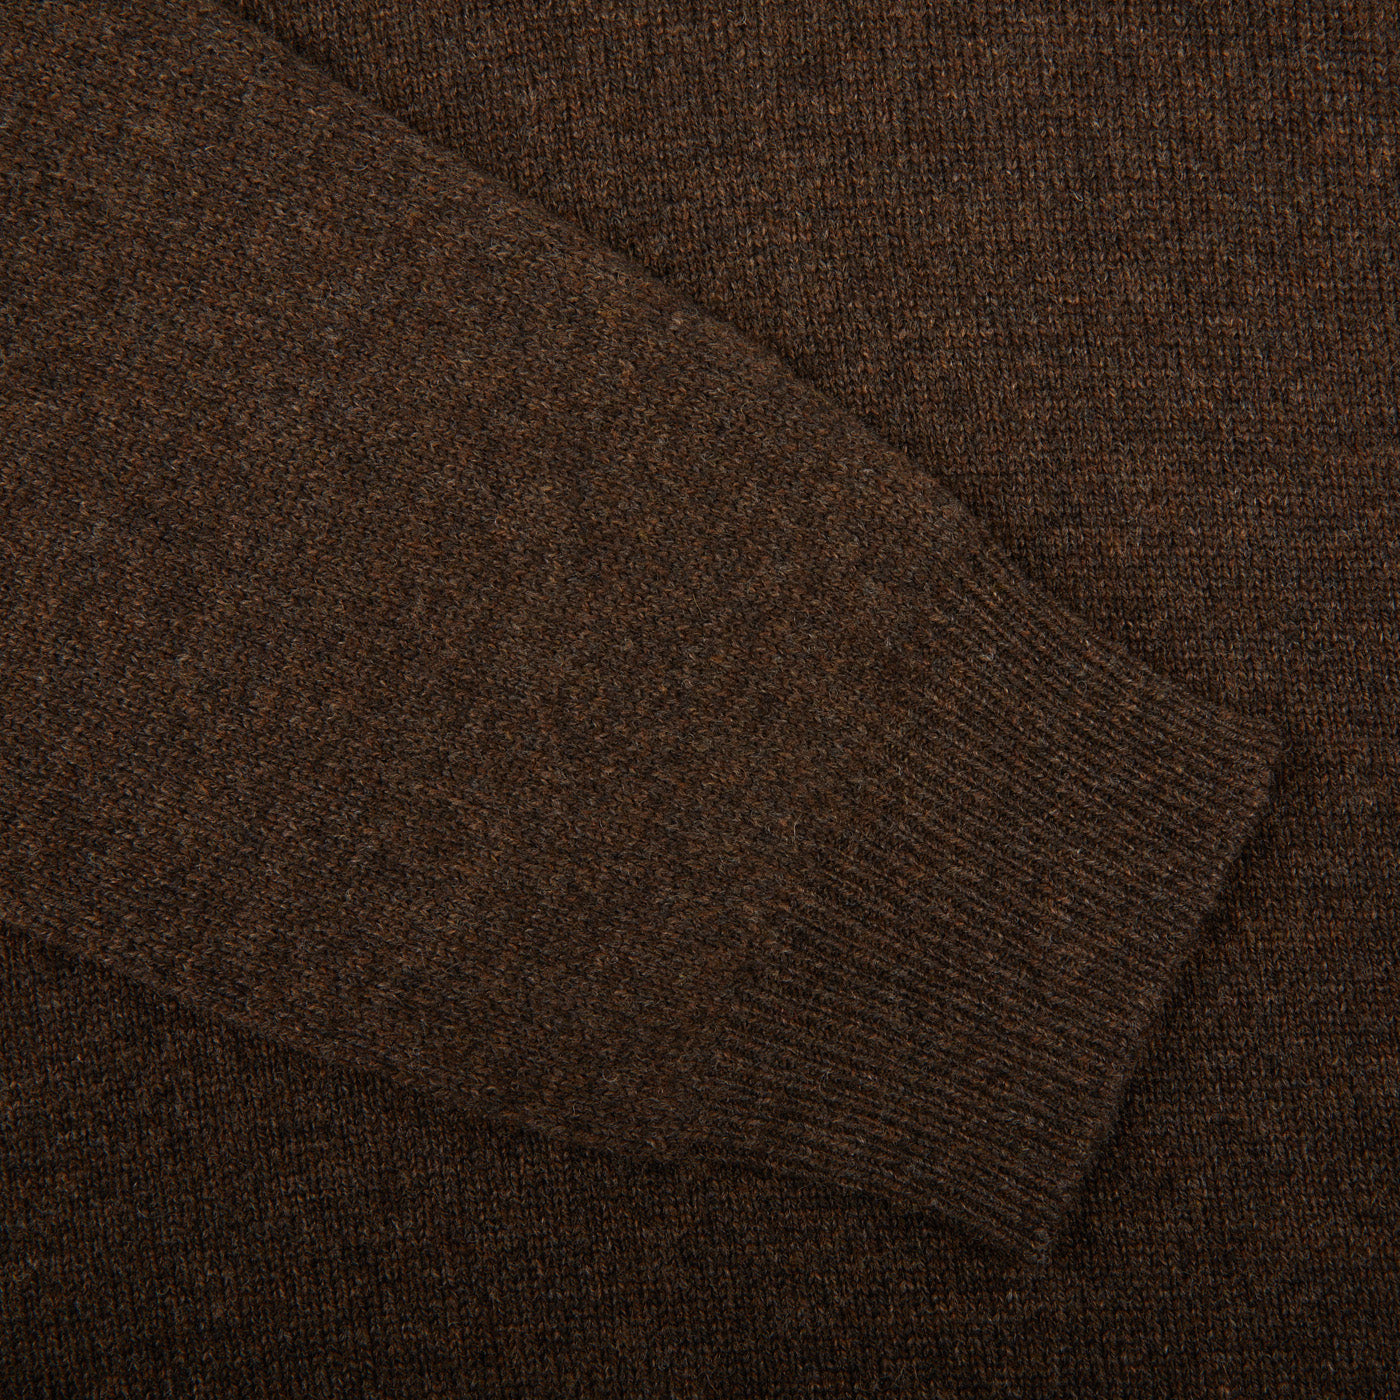 Alan Paine Cocoa Brown Lambswool Crew Neck Cuff